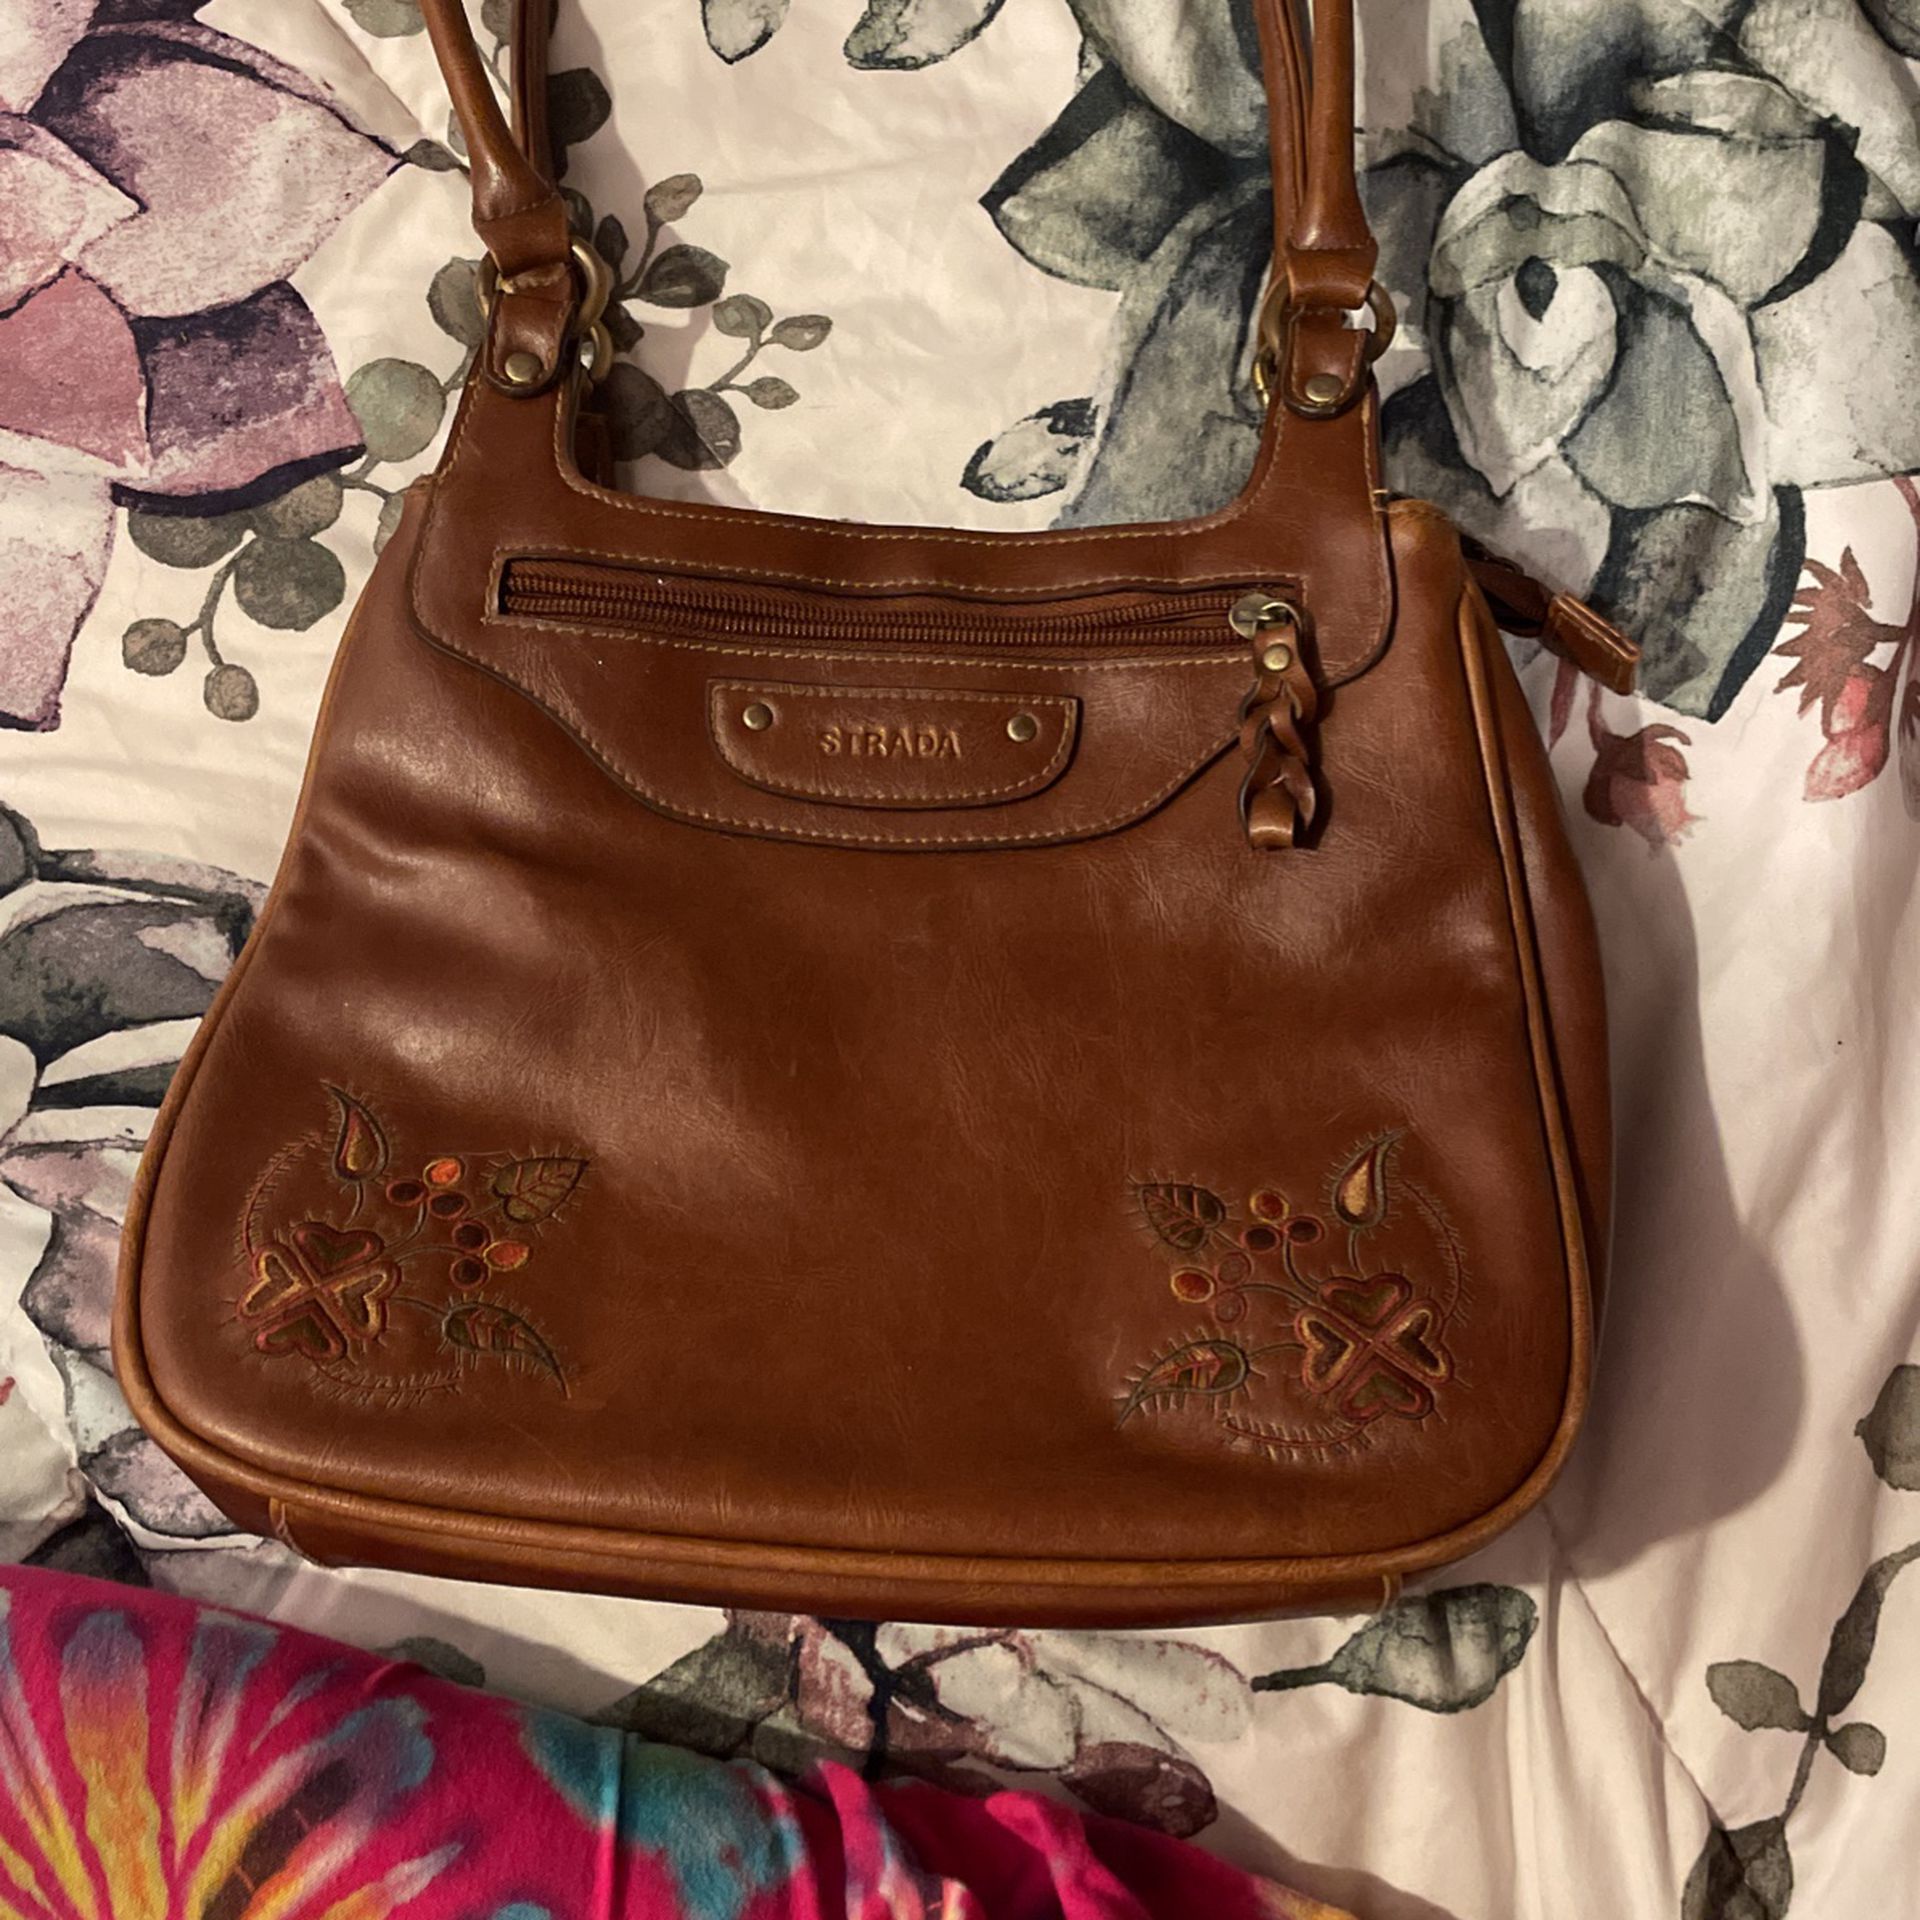 Purse With Matching Wallet 